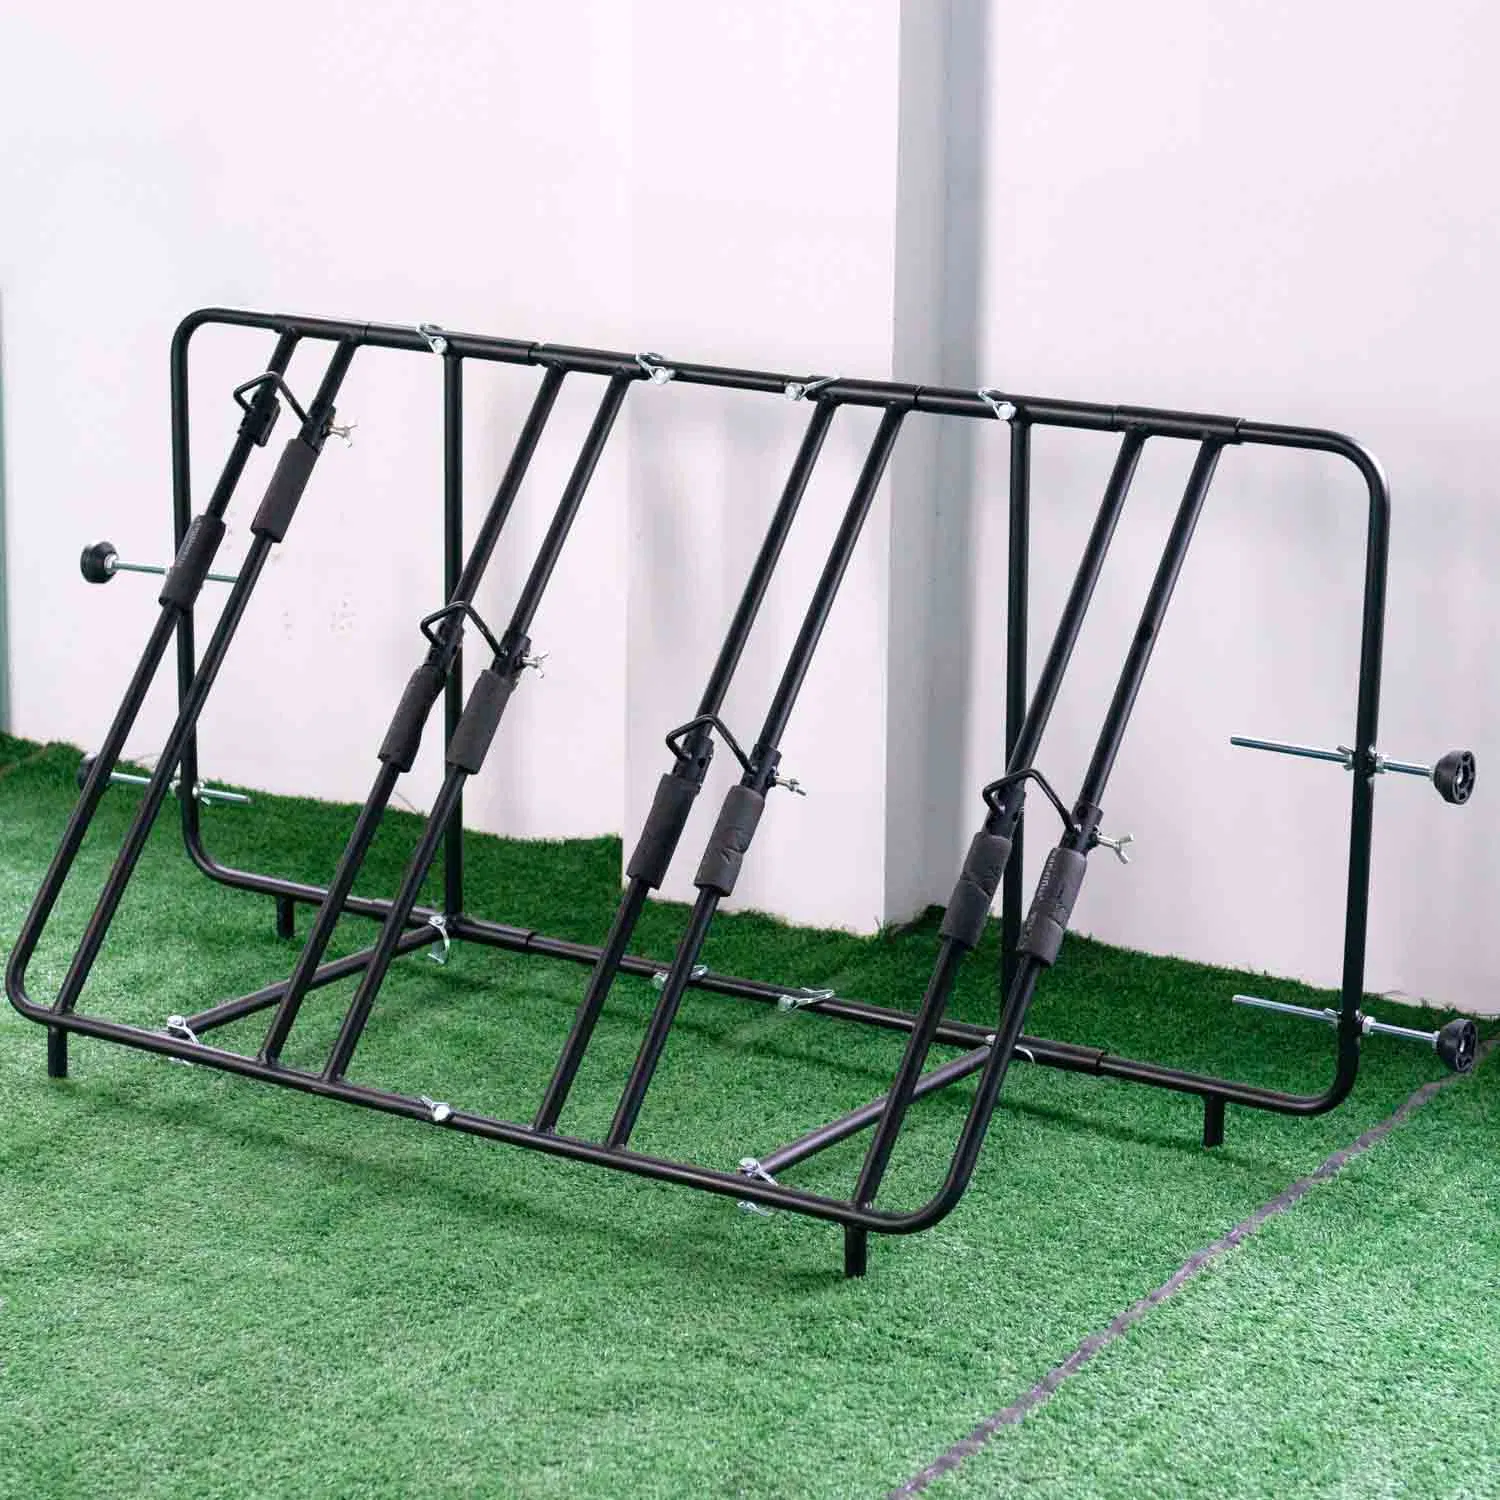 Truck Pickup Bicycle Carrier Rack Carrier Easy Fold High Load